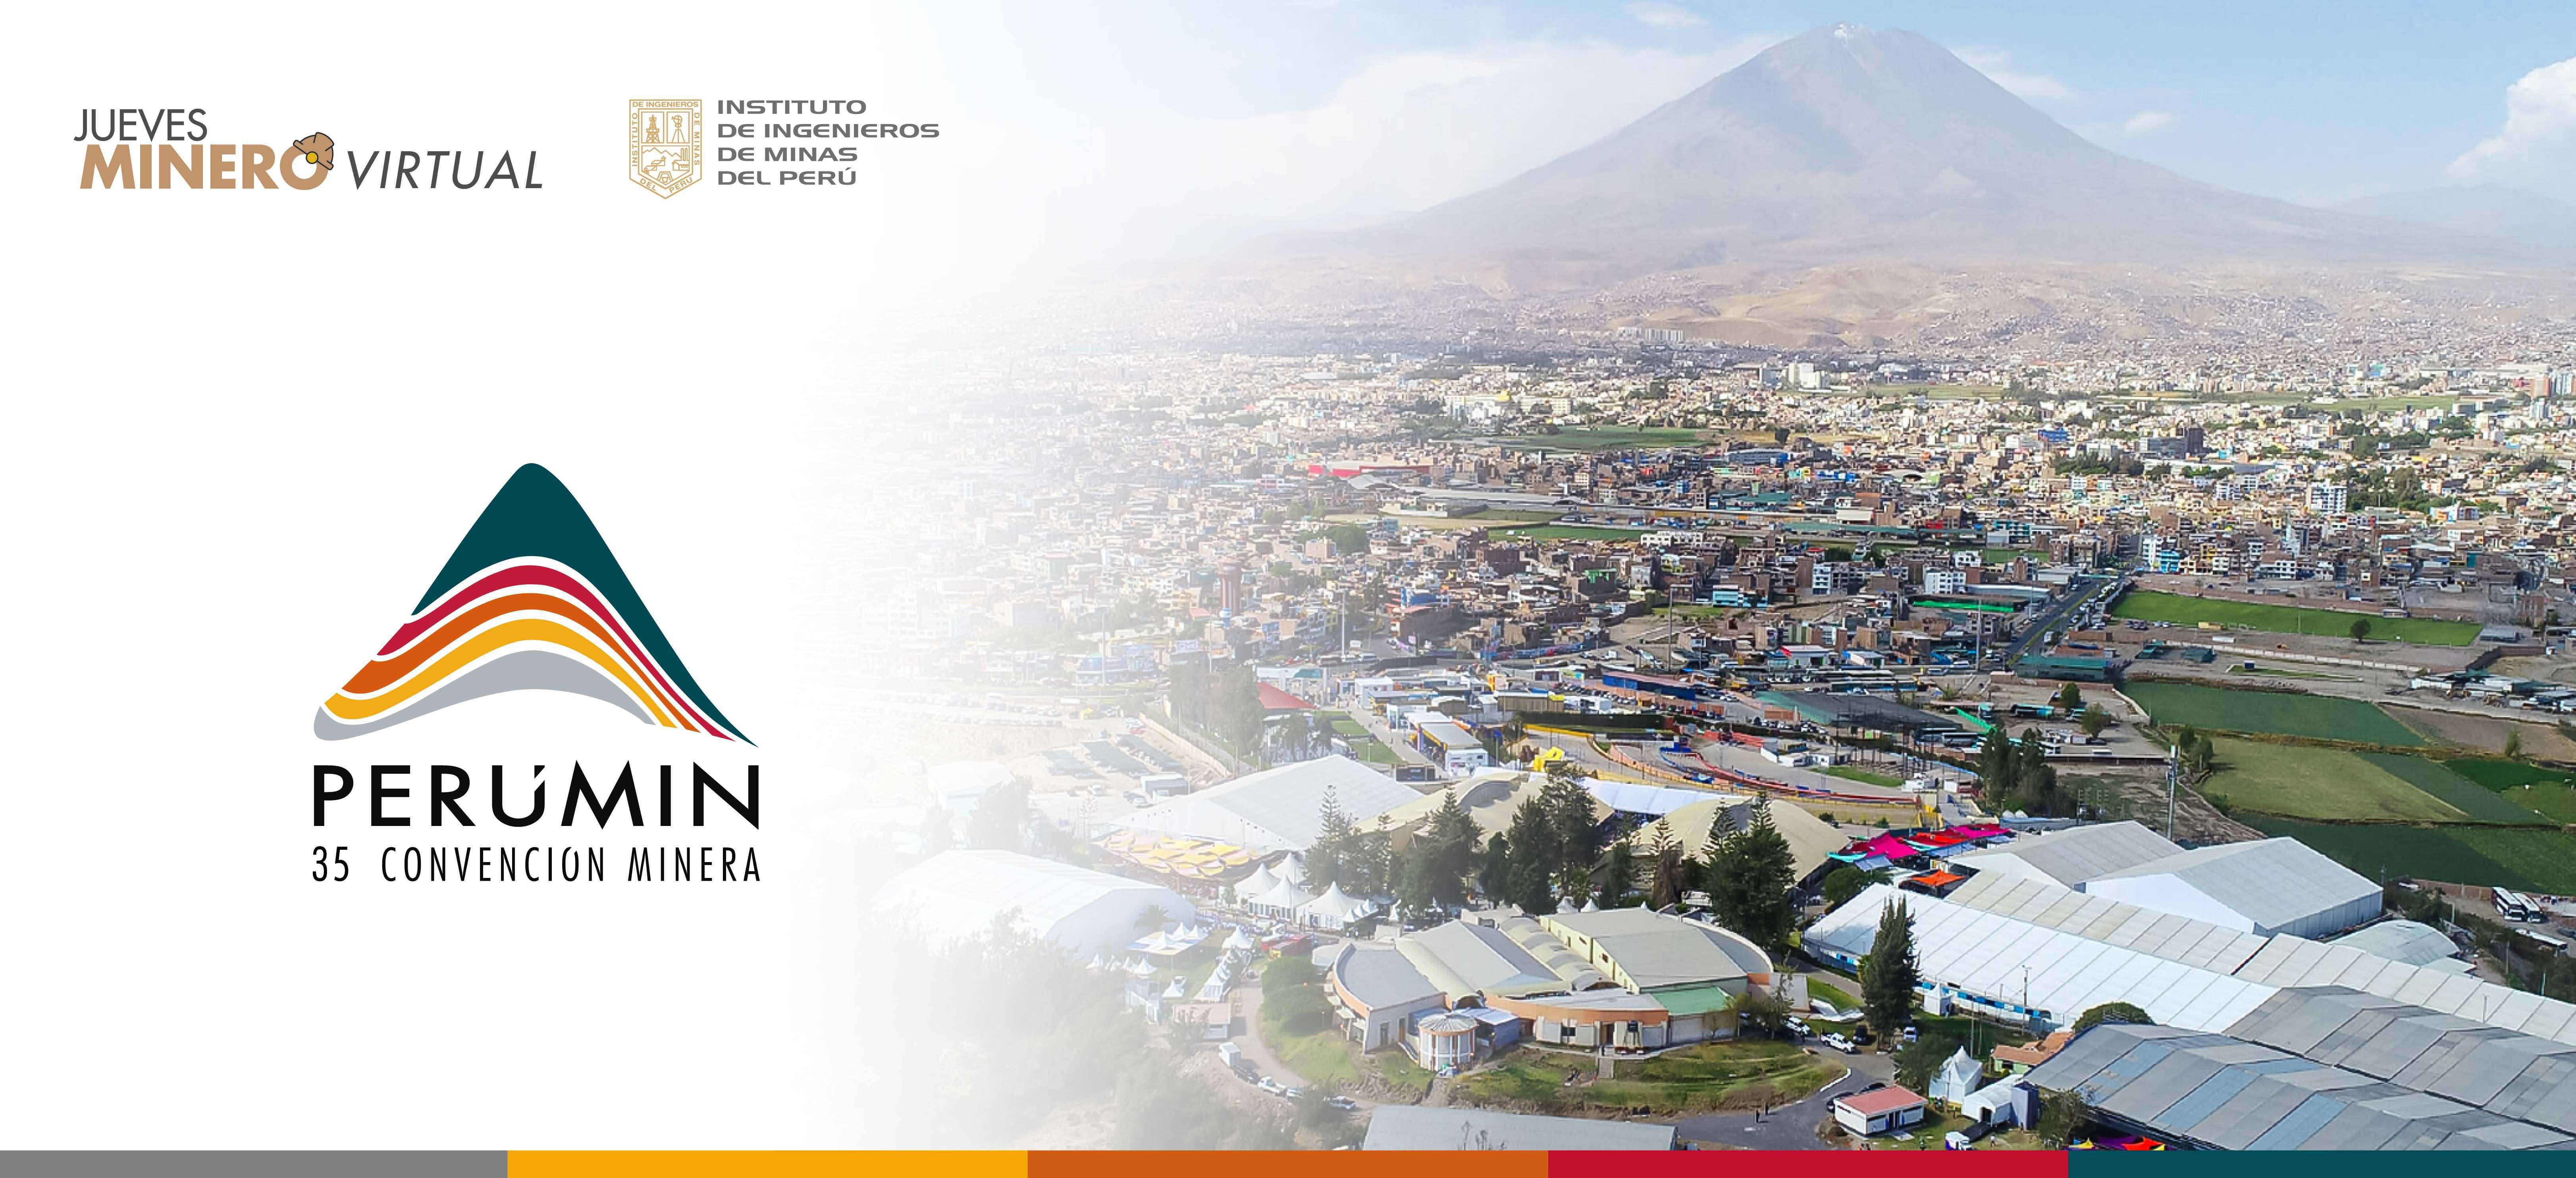 NEWS, INTERVIEWS AND EVERYTHING RELATED TO PERUMIN IN THE MEDIA